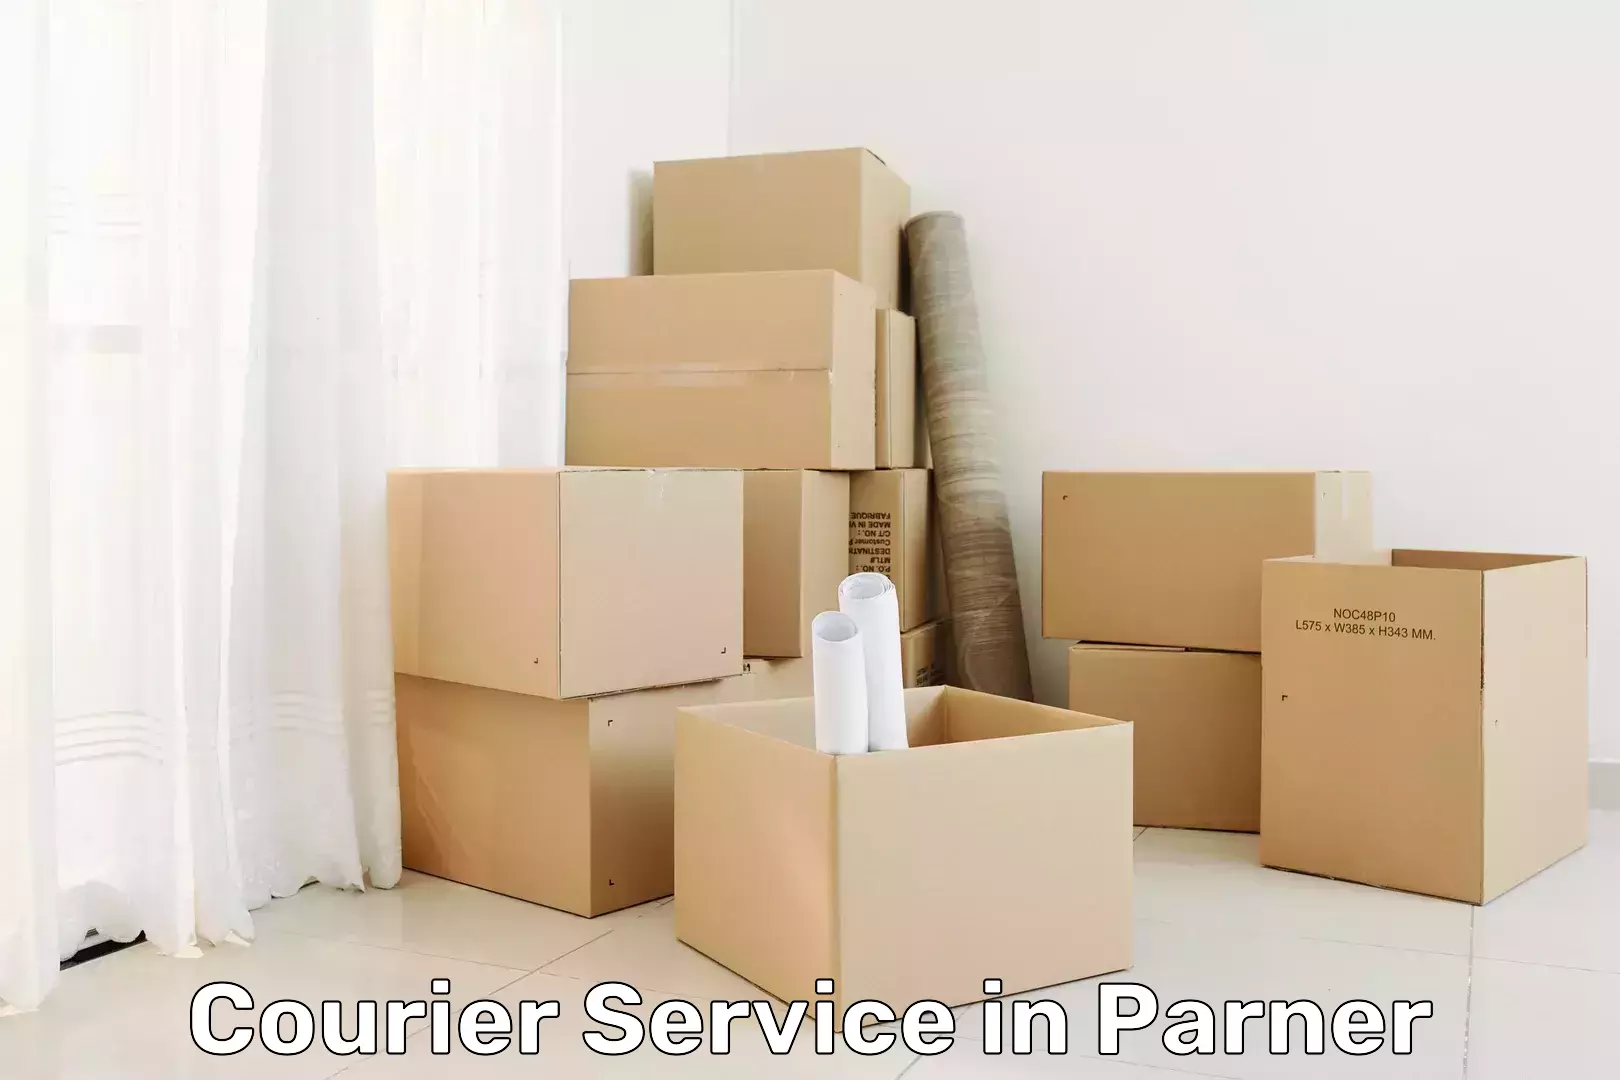 Tailored delivery services in Parner